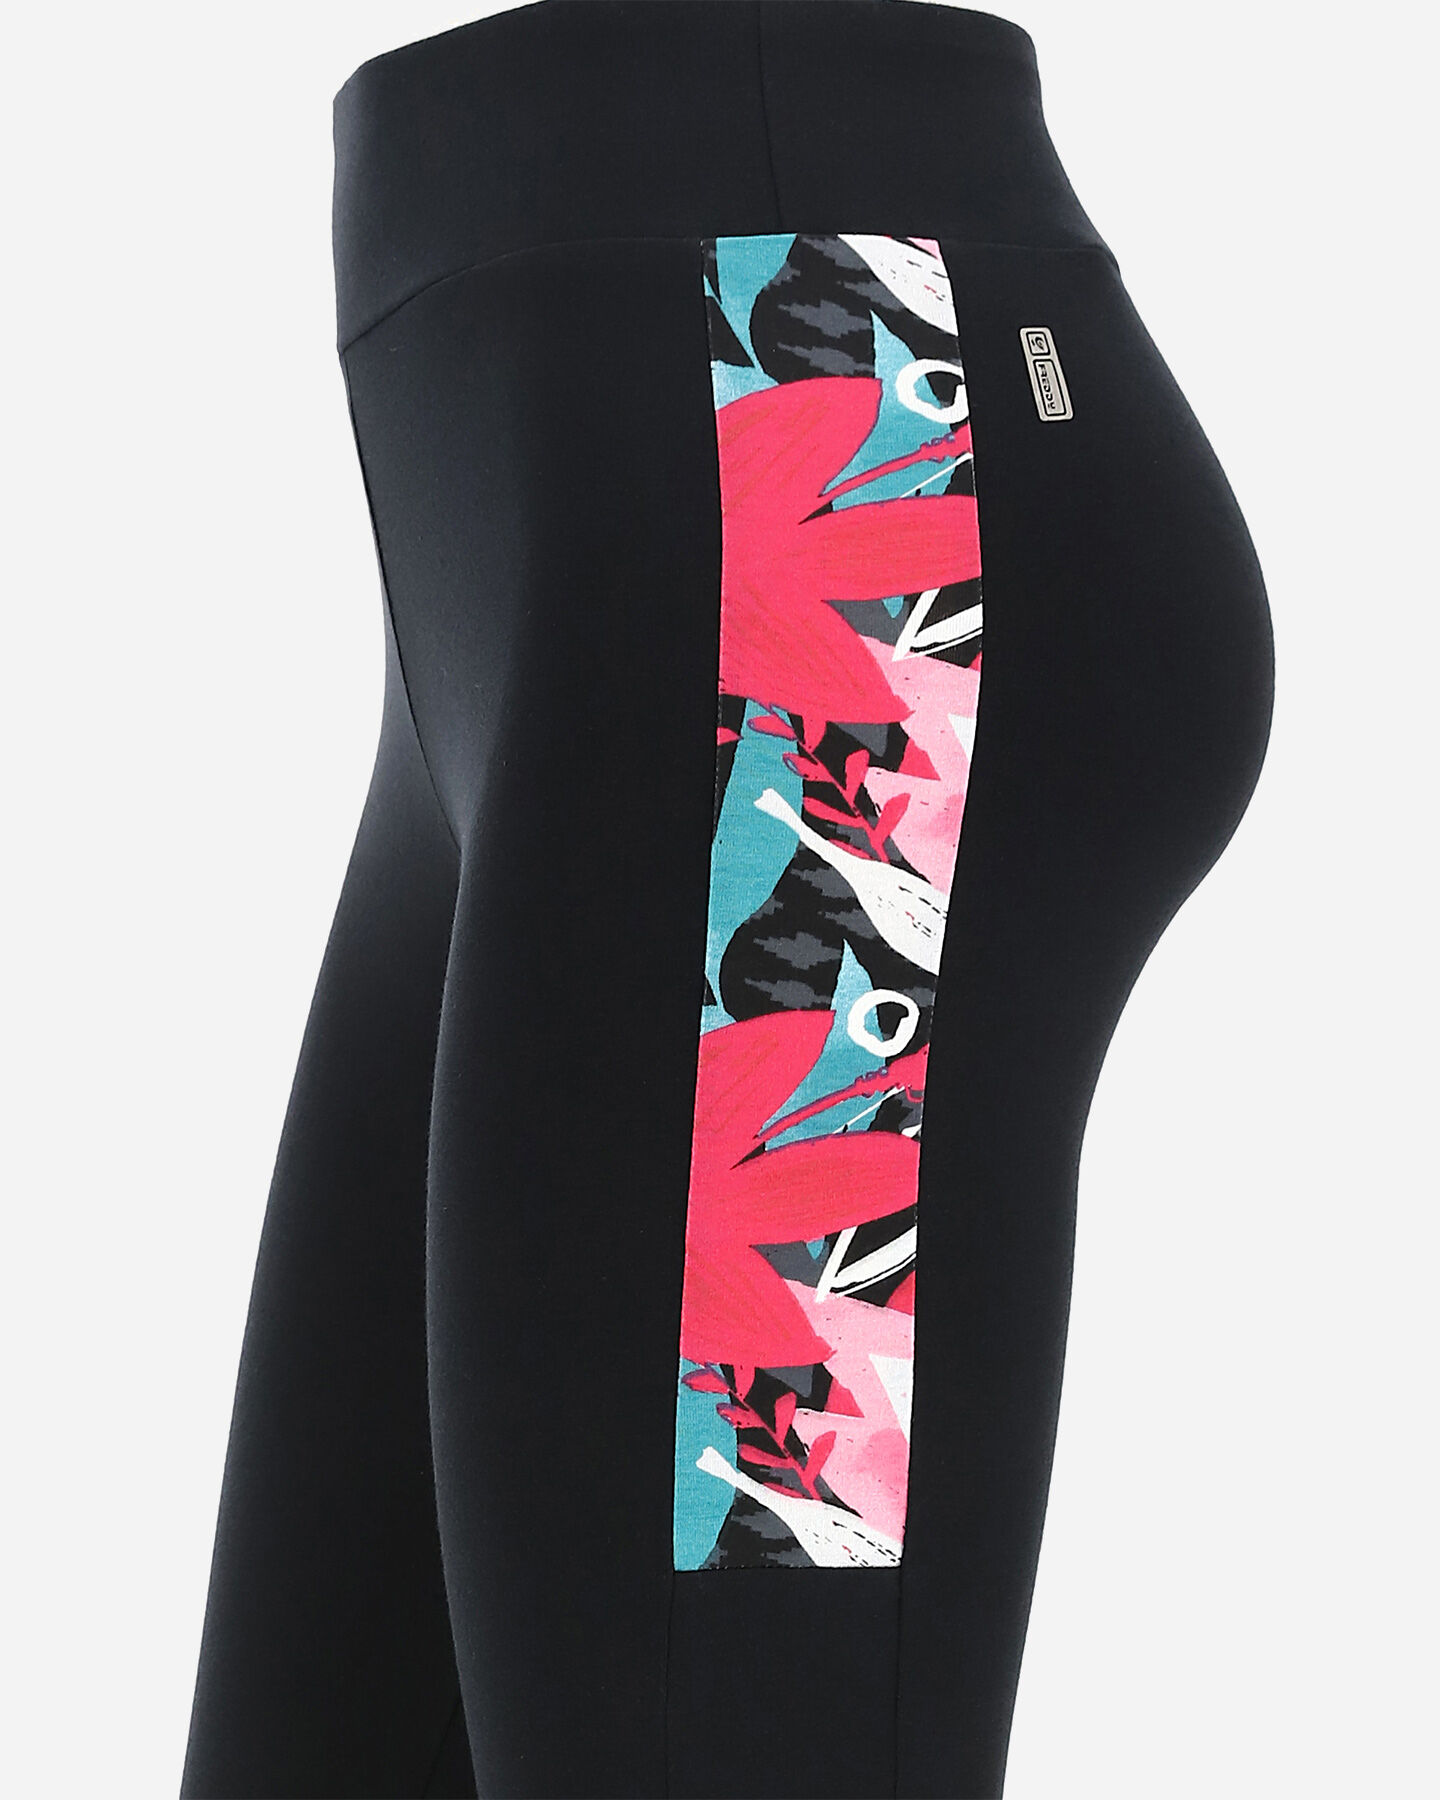  Leggings FREDDY JSTRETCH BAND FLOWERS LATERAL W S5432087|NFLO20-|XS scatto 2